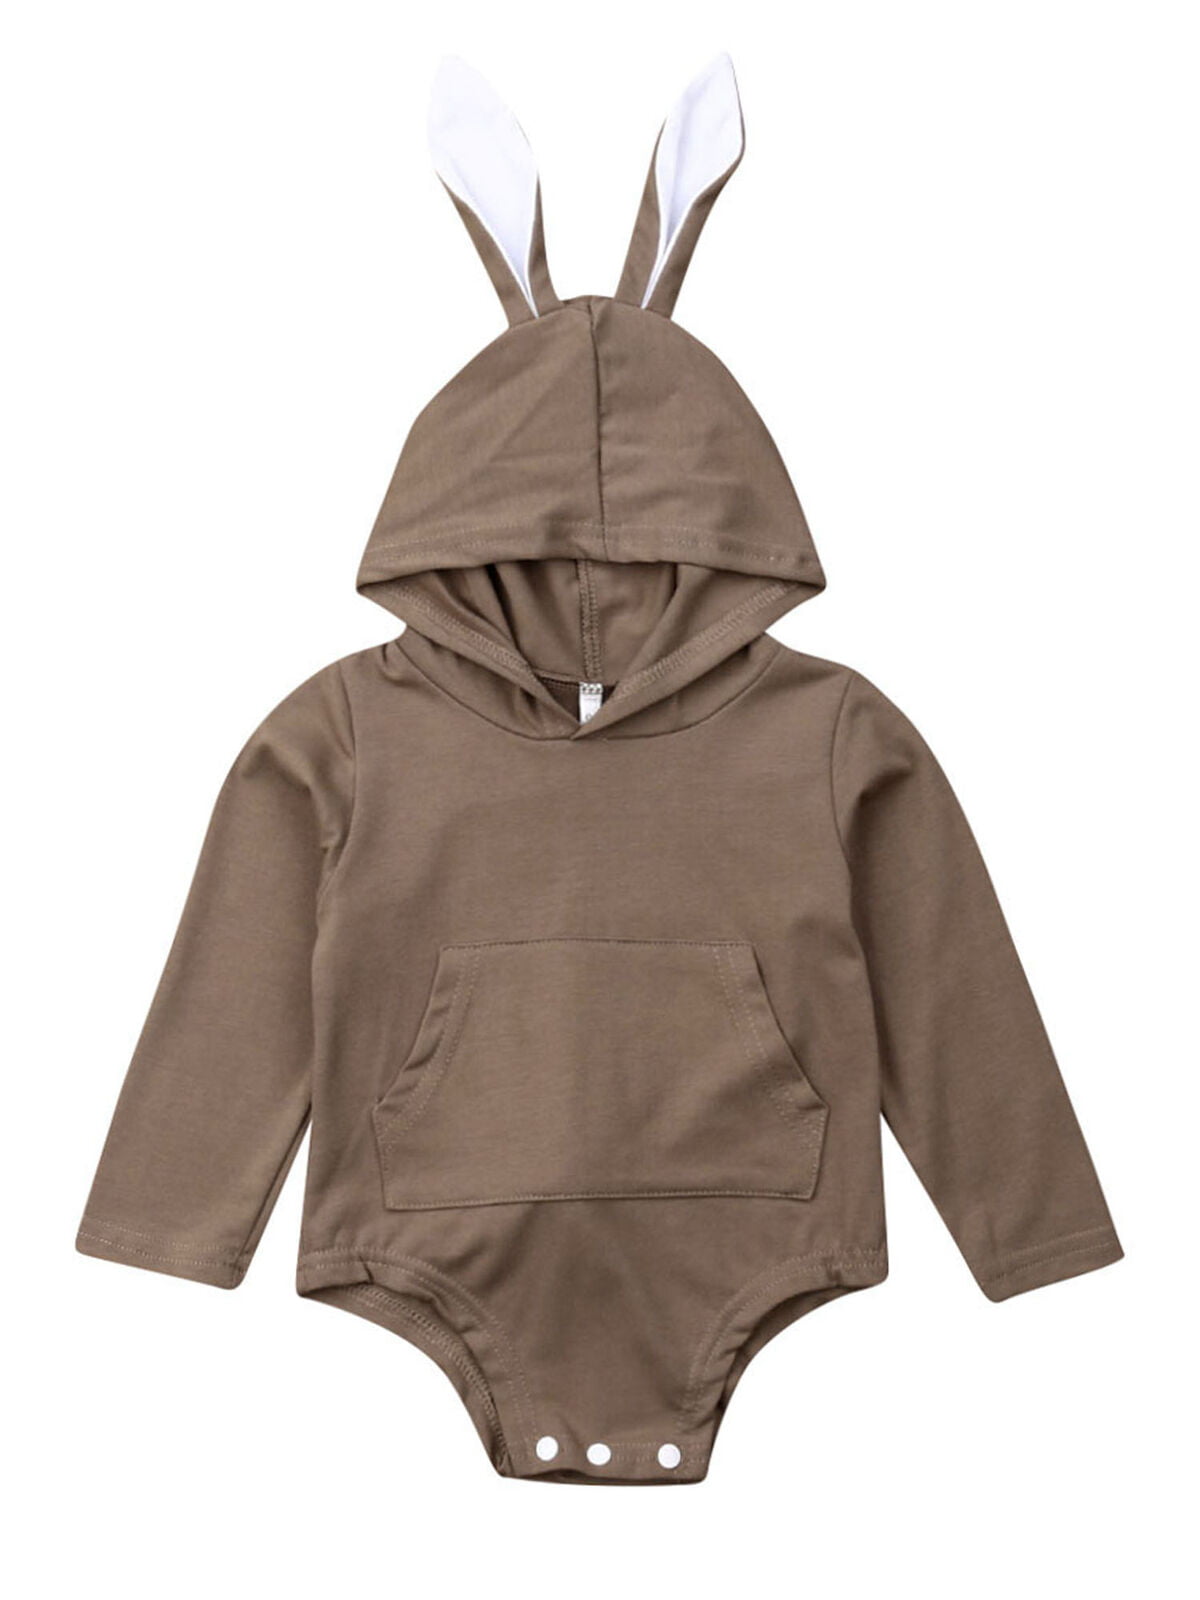 Easter Infant Baby Boys Girls Rabbit Bunny Ears Hooded Romper Jumpsuit Outfits 